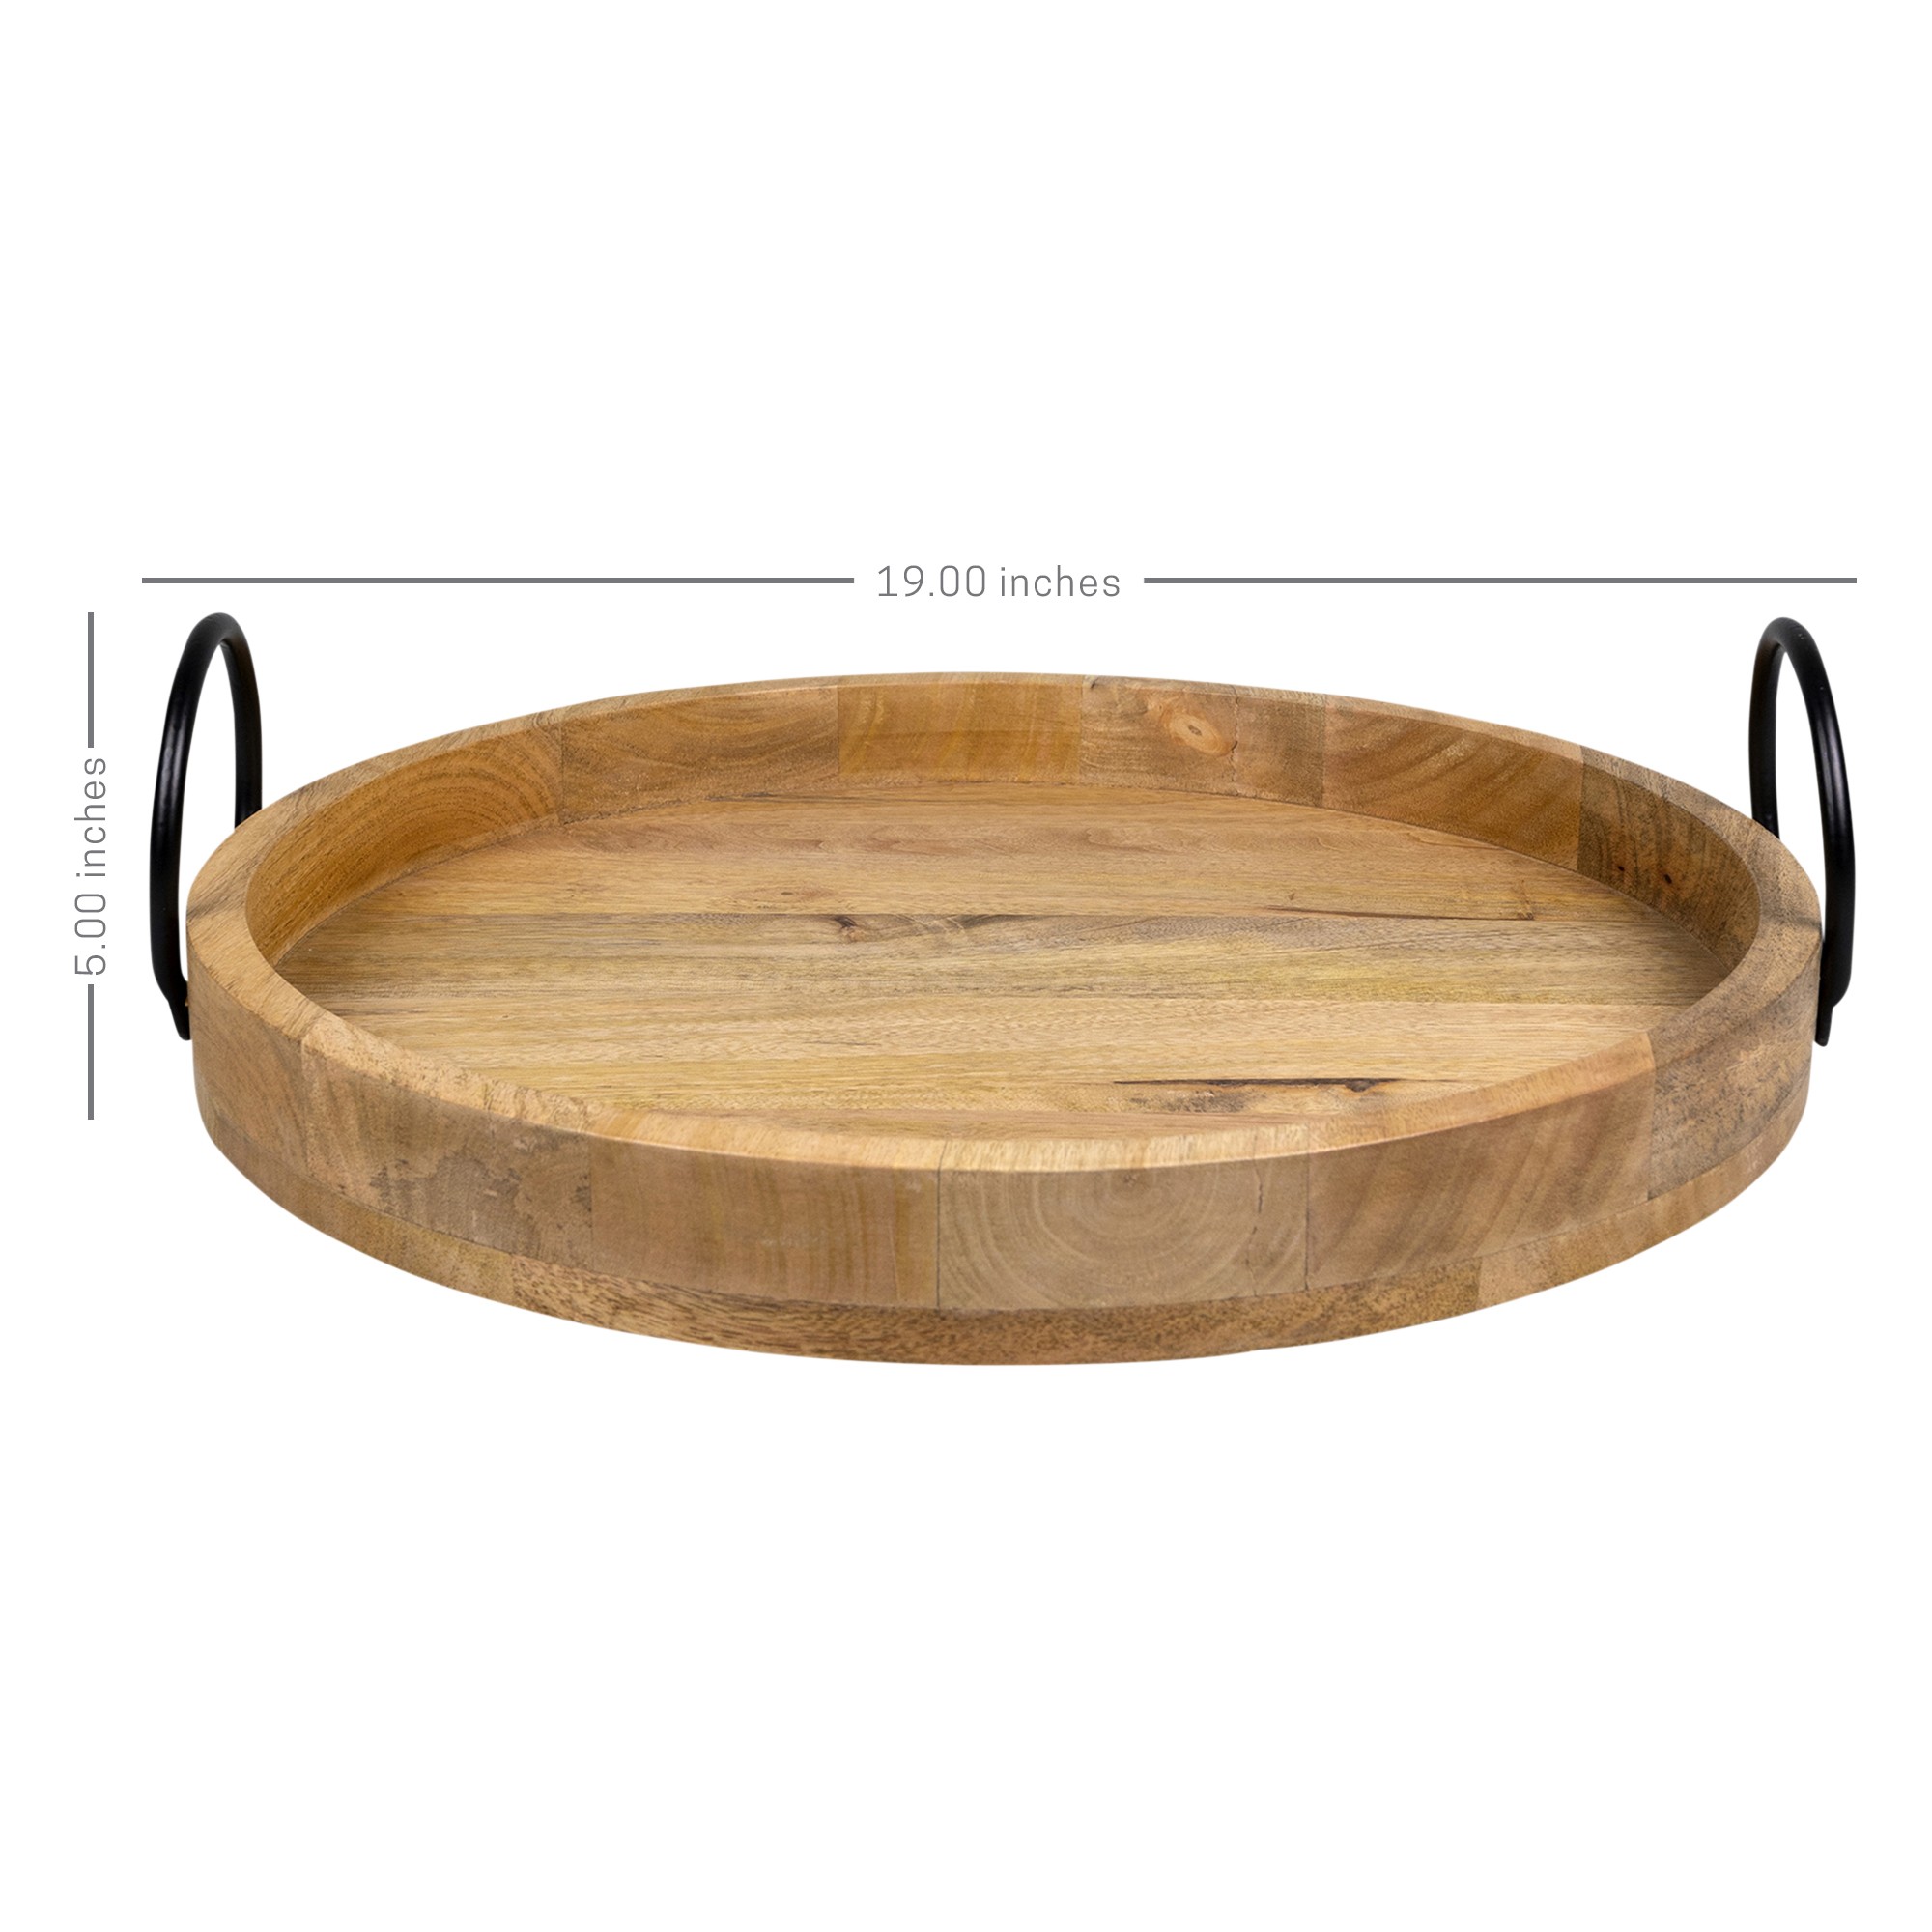 Mod Round Wooden Tray with Iron Handles